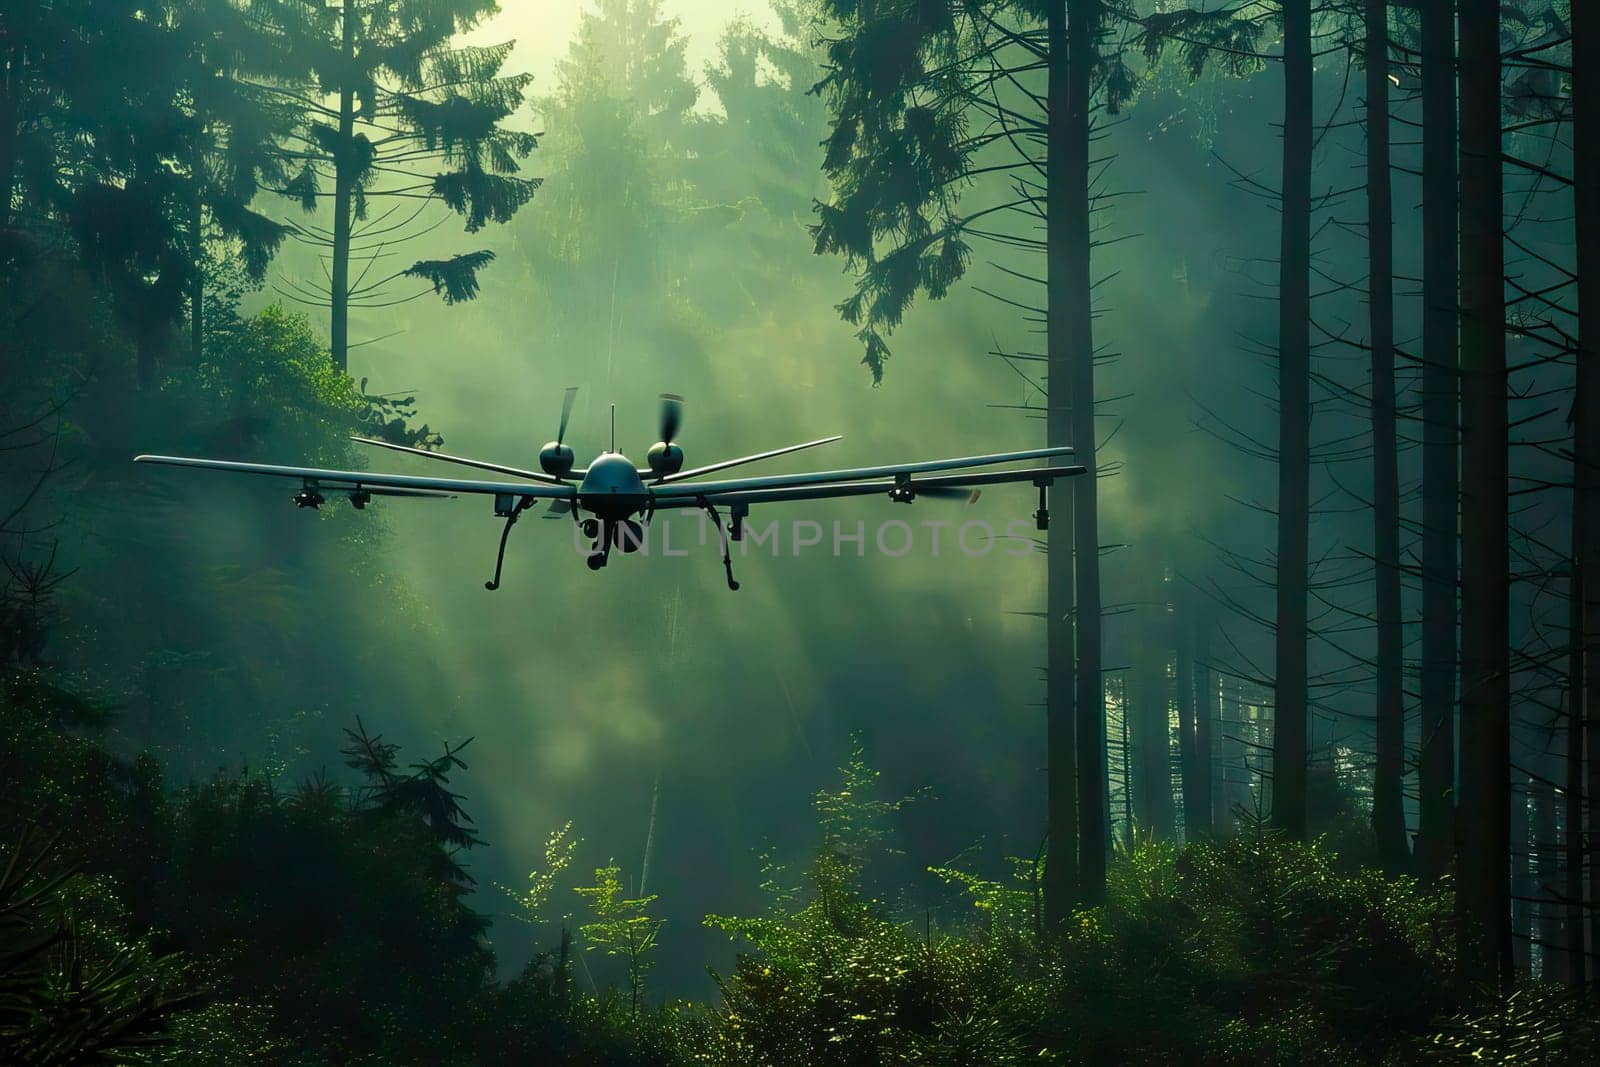 Military plane flies over a dense forest filled with towering trees.